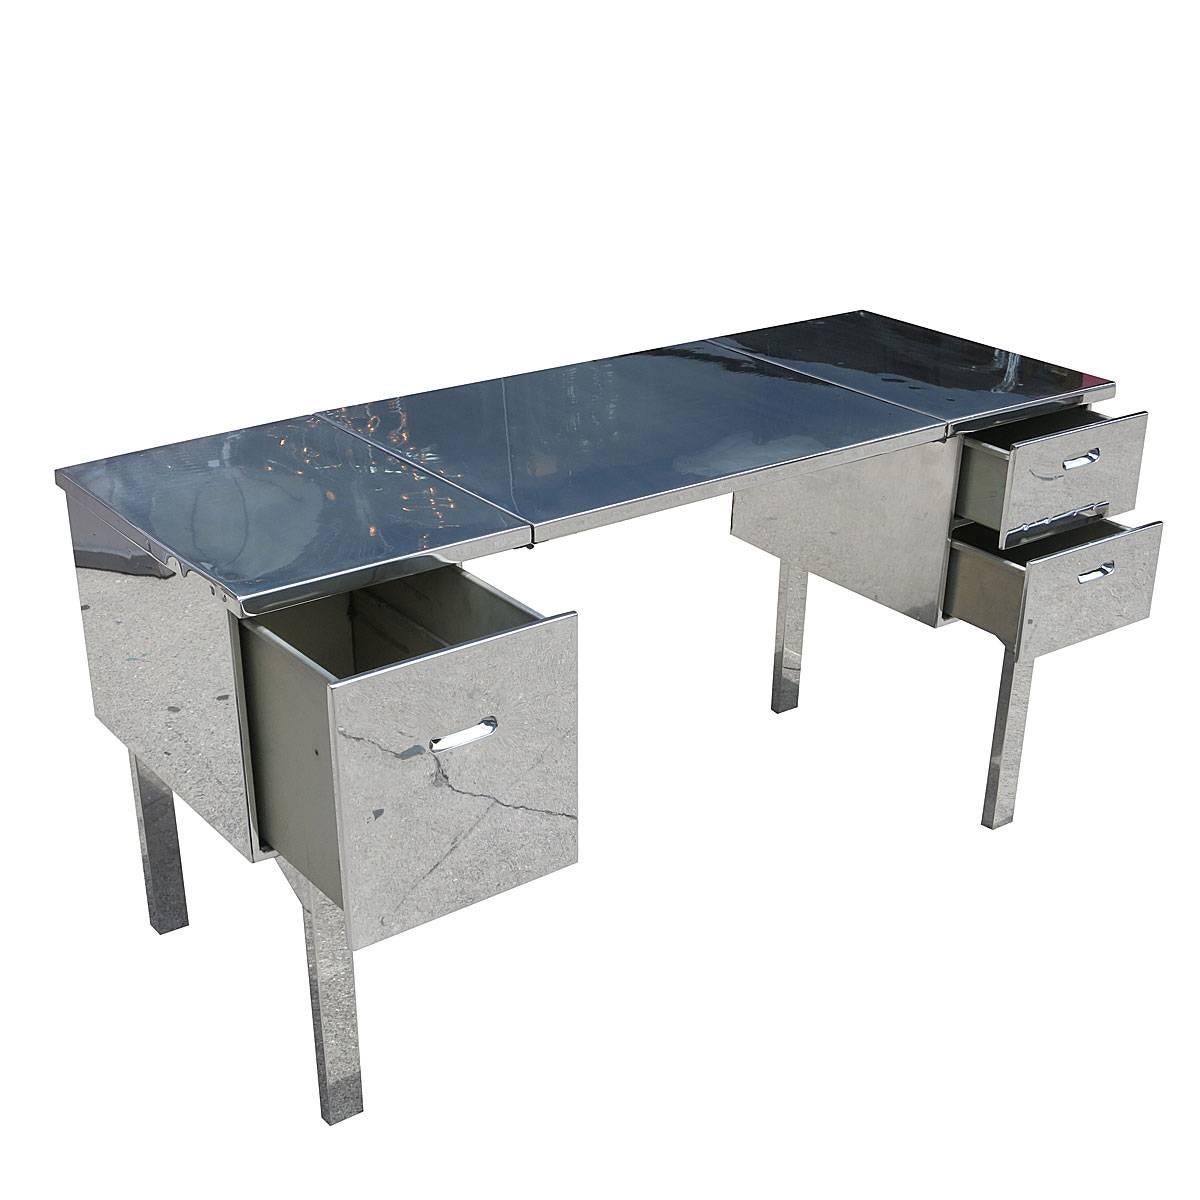 Originally designed for officers on the field in World War II this aluminum campaign desk has been refinished with a mirrored polish. It comes with three side drawers and easily folds up into the size of a large suitcase. Great for Desk, Vanity 

A